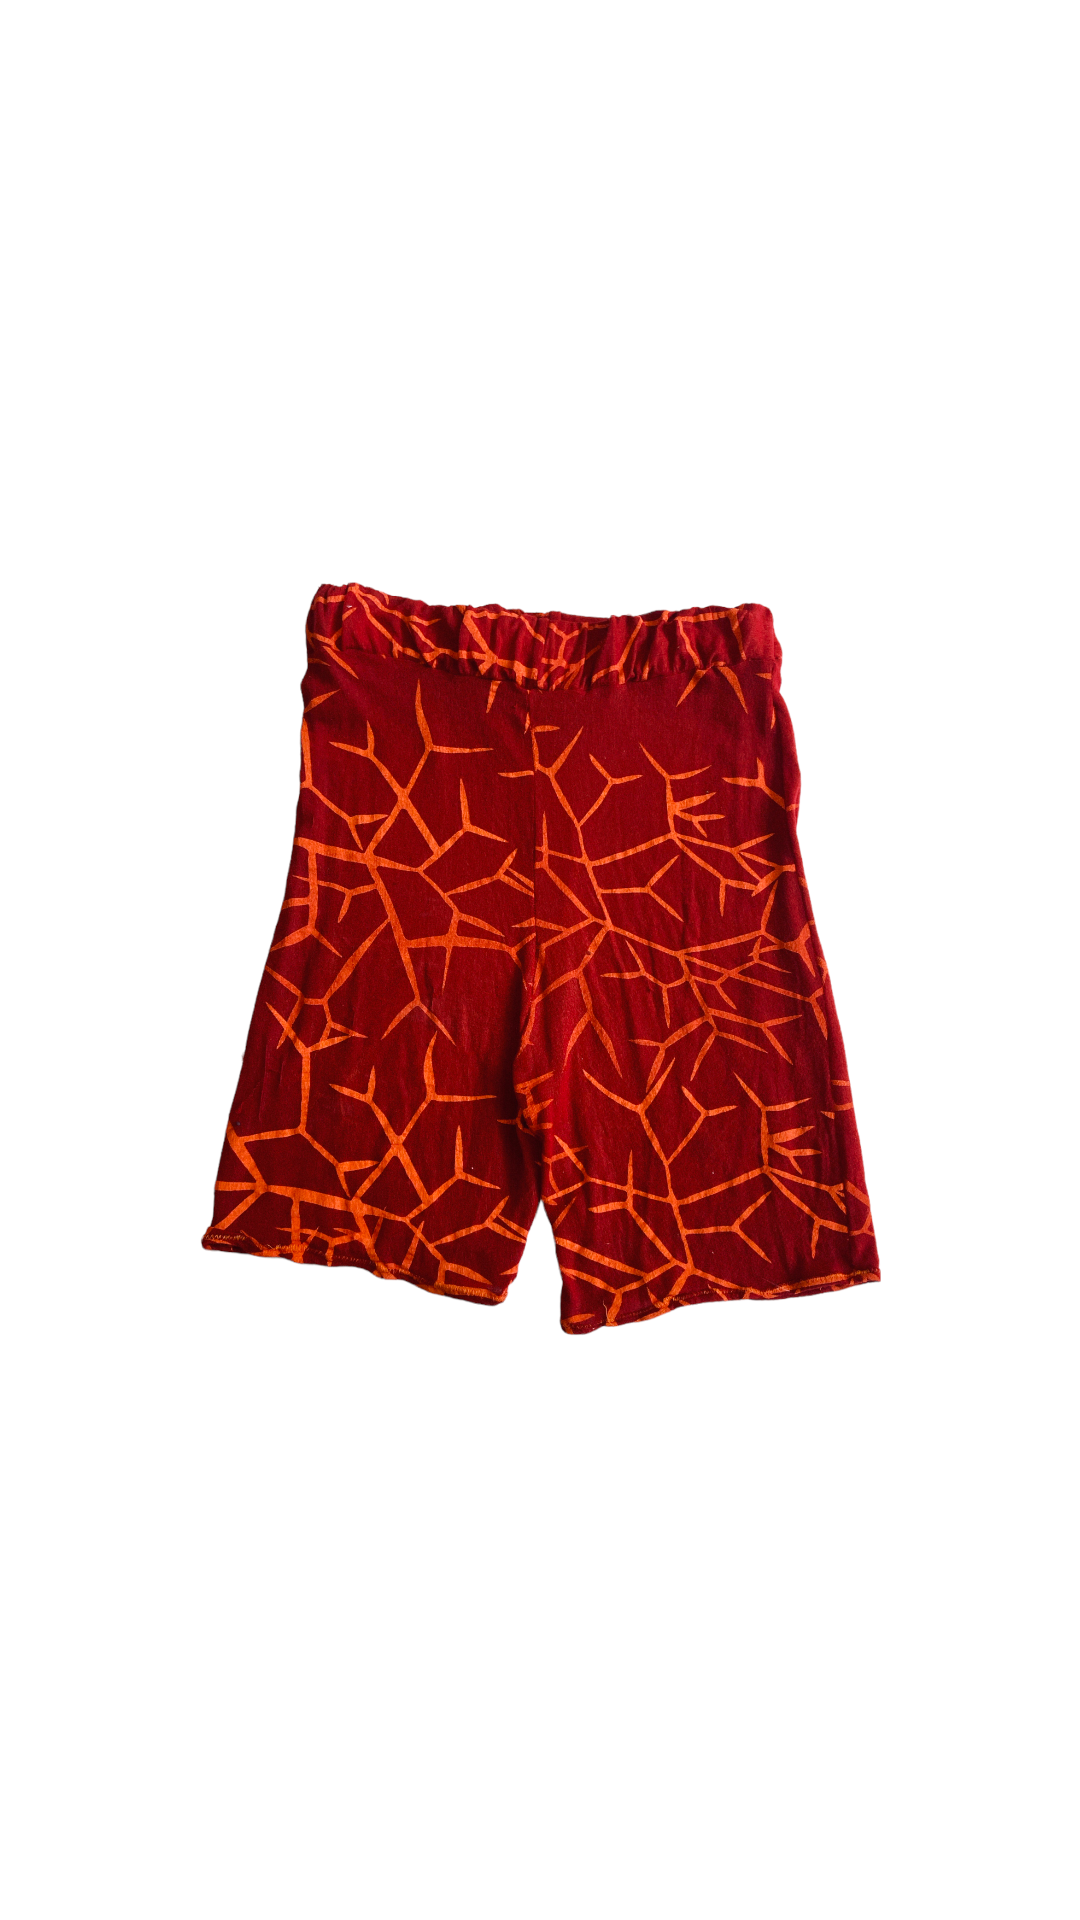 Product shot of the Mona Cordes long sleeve, red, printed, biker shorts. The print has bright orange abstract lines that resemble tree roots.